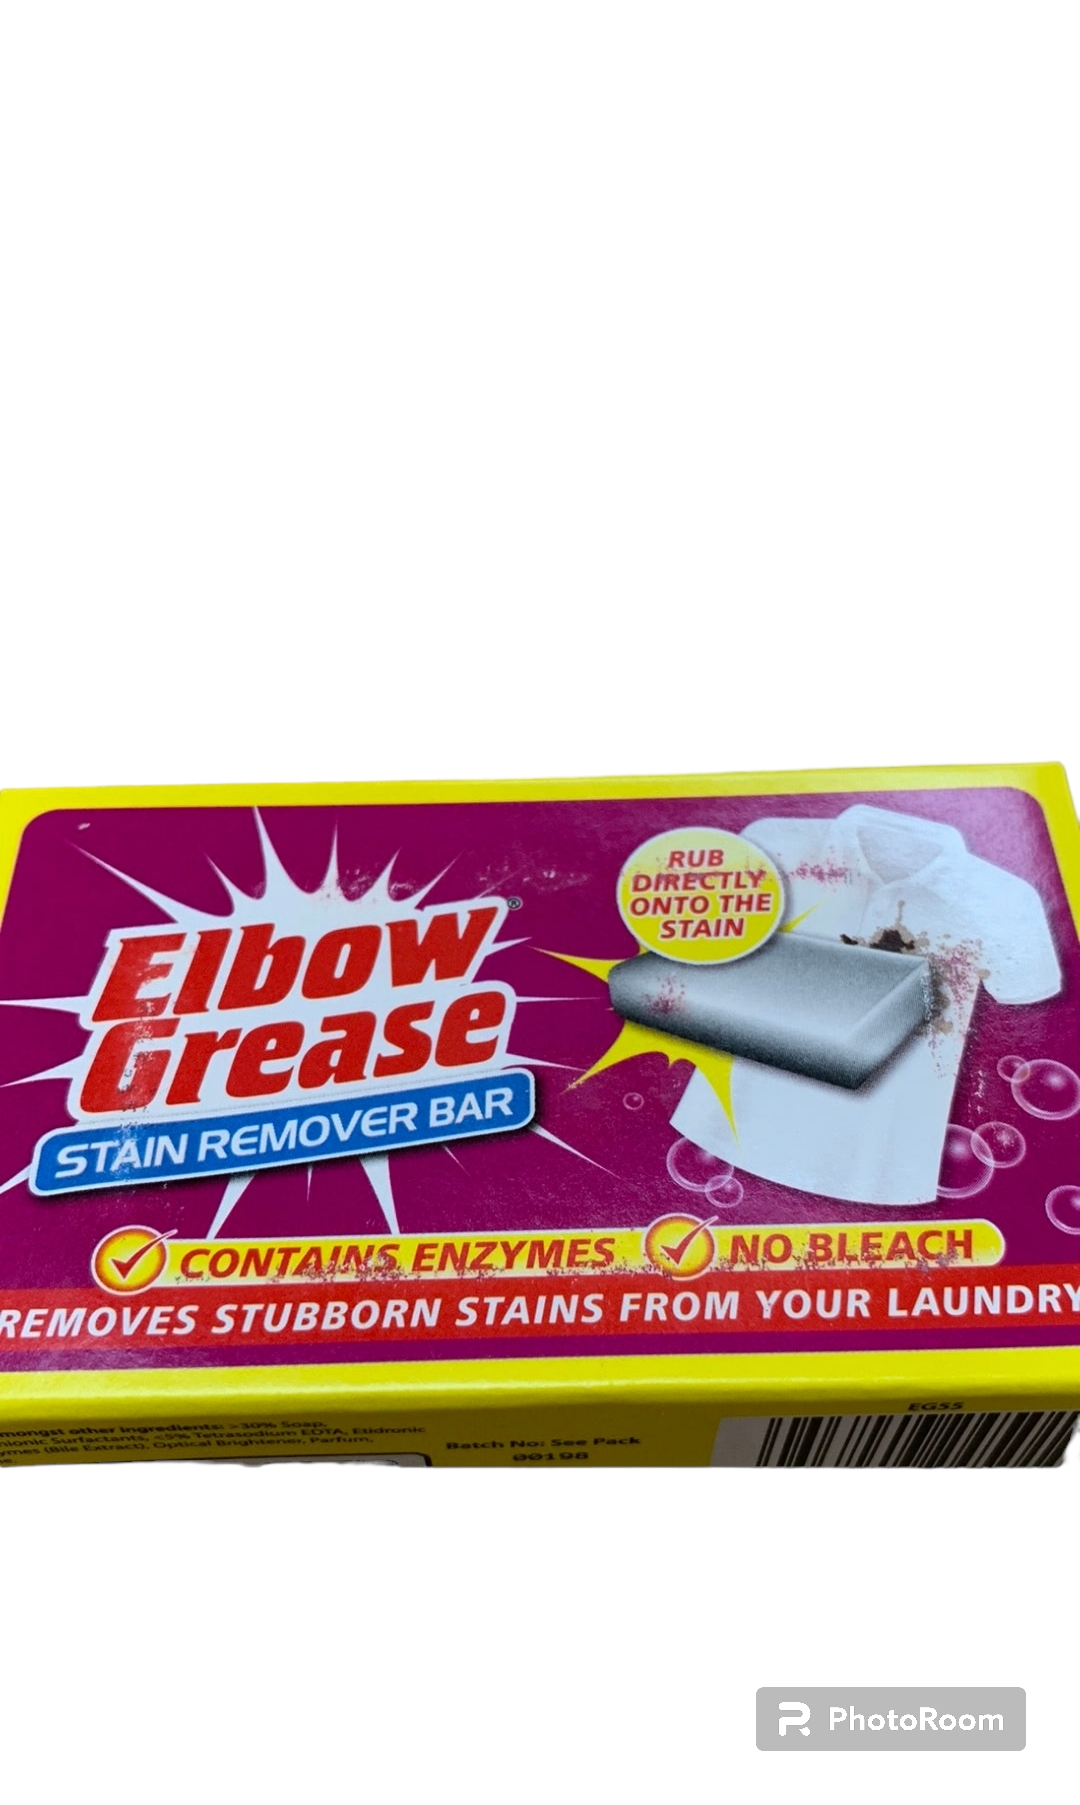 Elbow grease stain removing bar